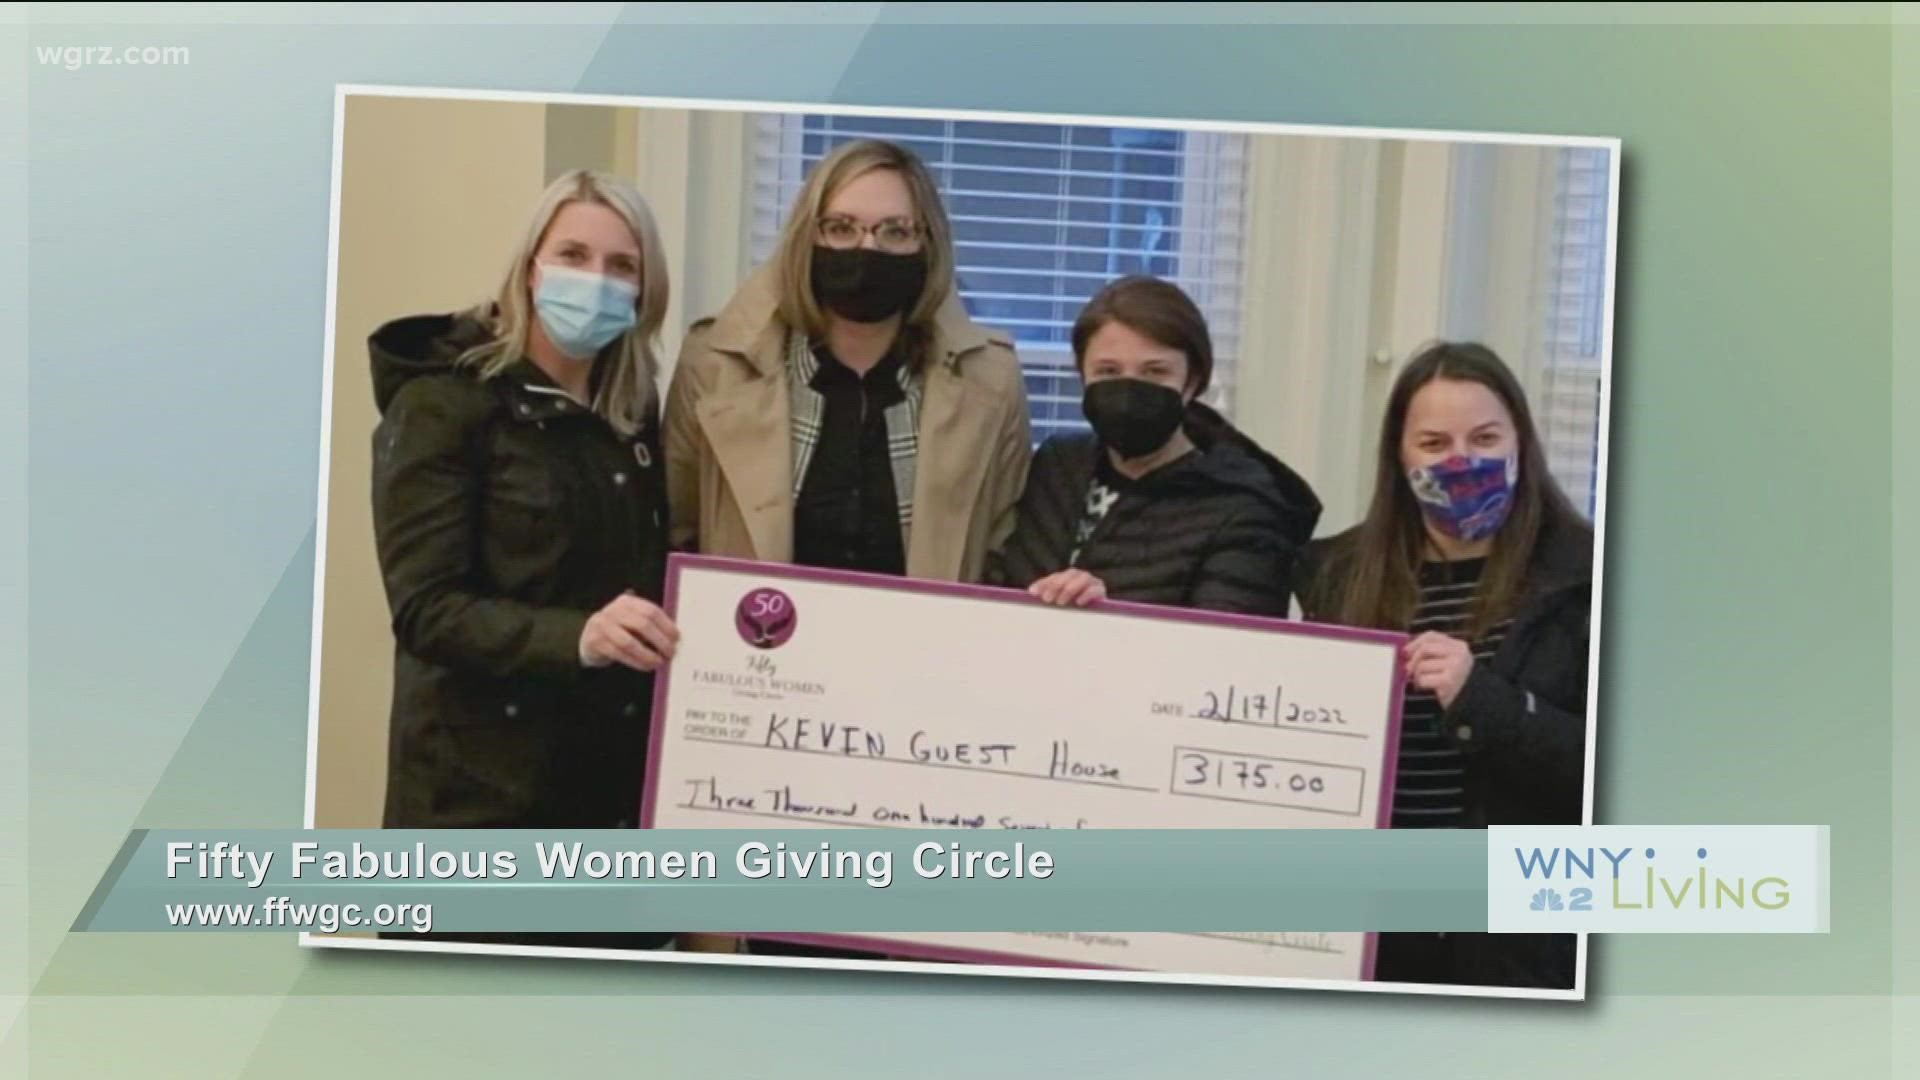 WNY Living - March 26 - Fifty Fabulous Women Giving Circle (THIS VIDEO IS SPONSORED BY FIFTY FABULOUS WOMEN GIVING CIRCLE)